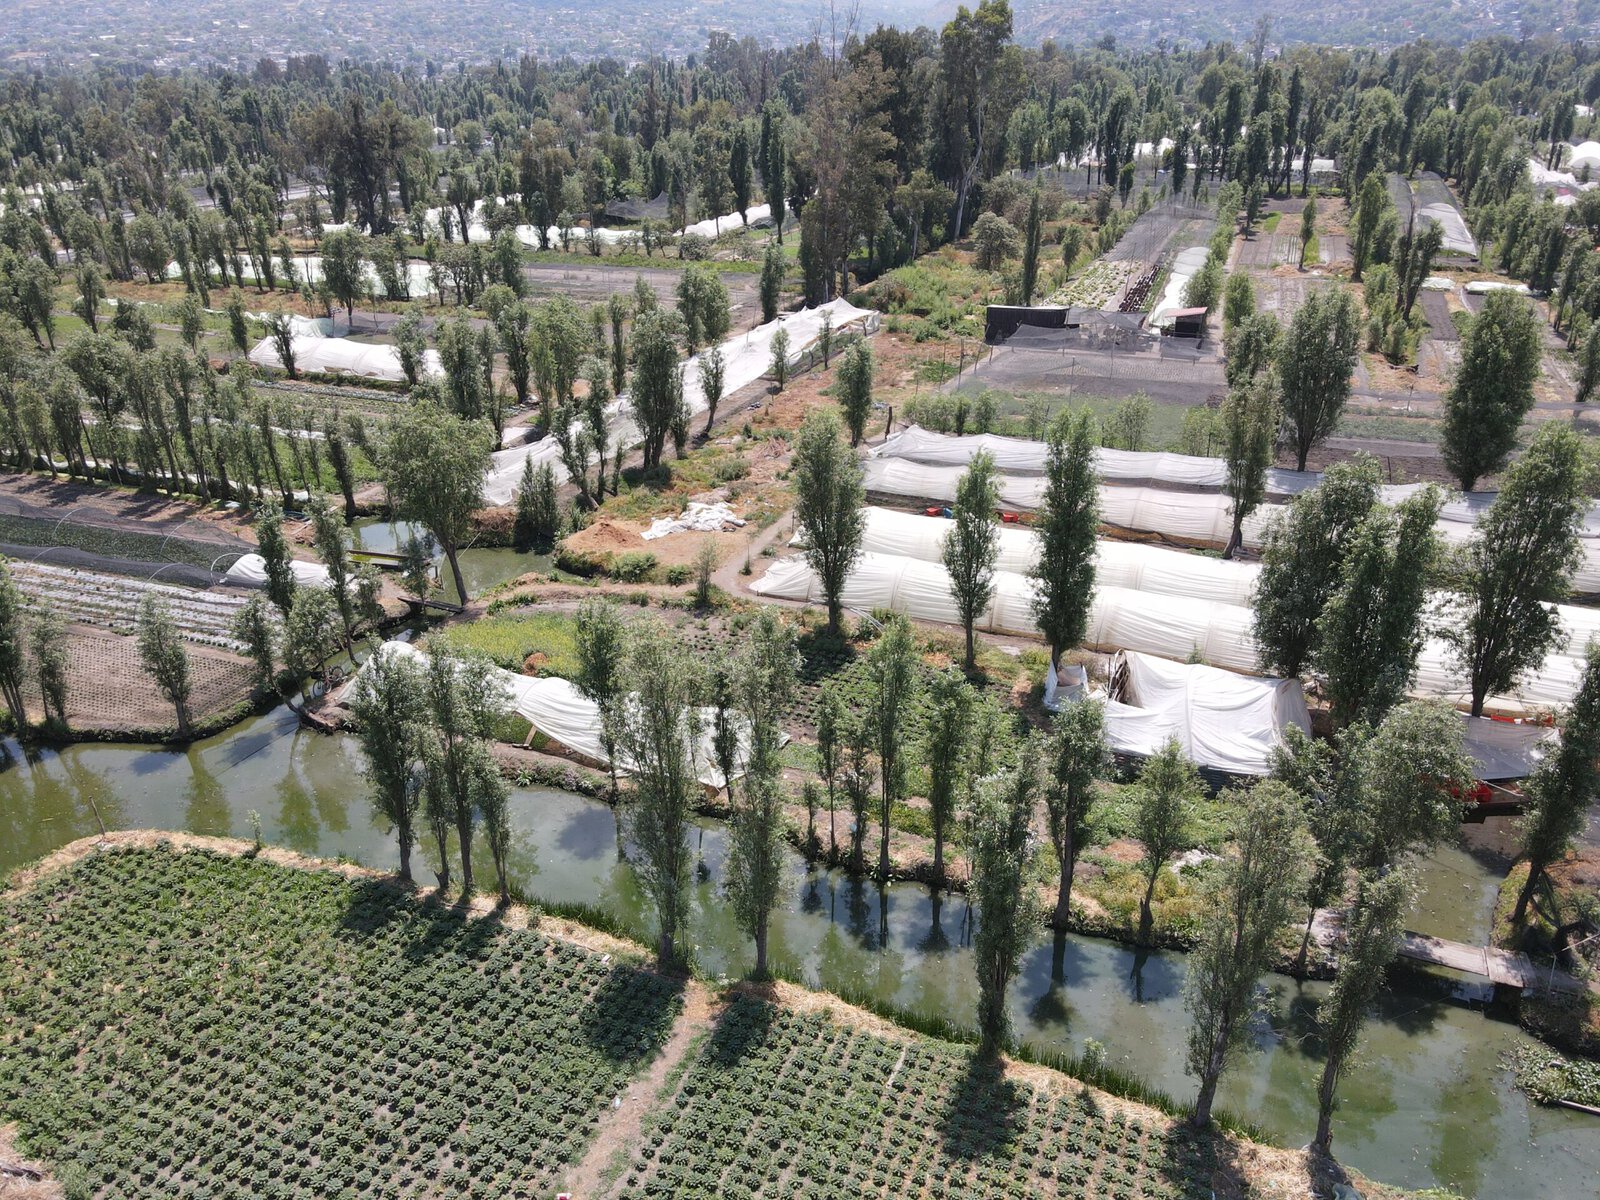 An aerial view of chinampas, floating gardens, with trees growing around the edges.